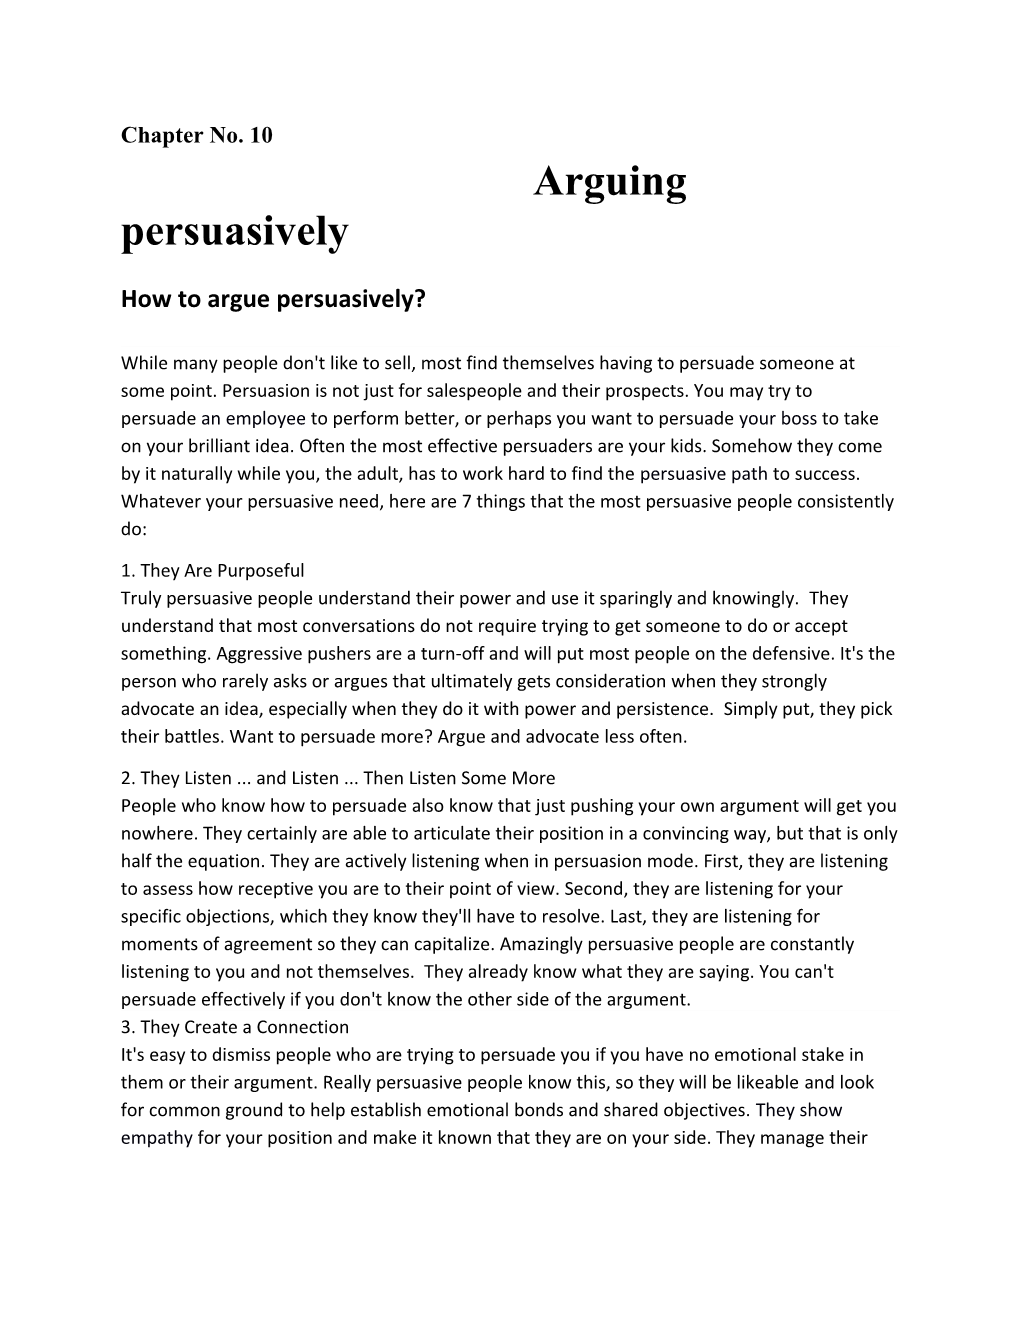 How to Argue Persuasively?